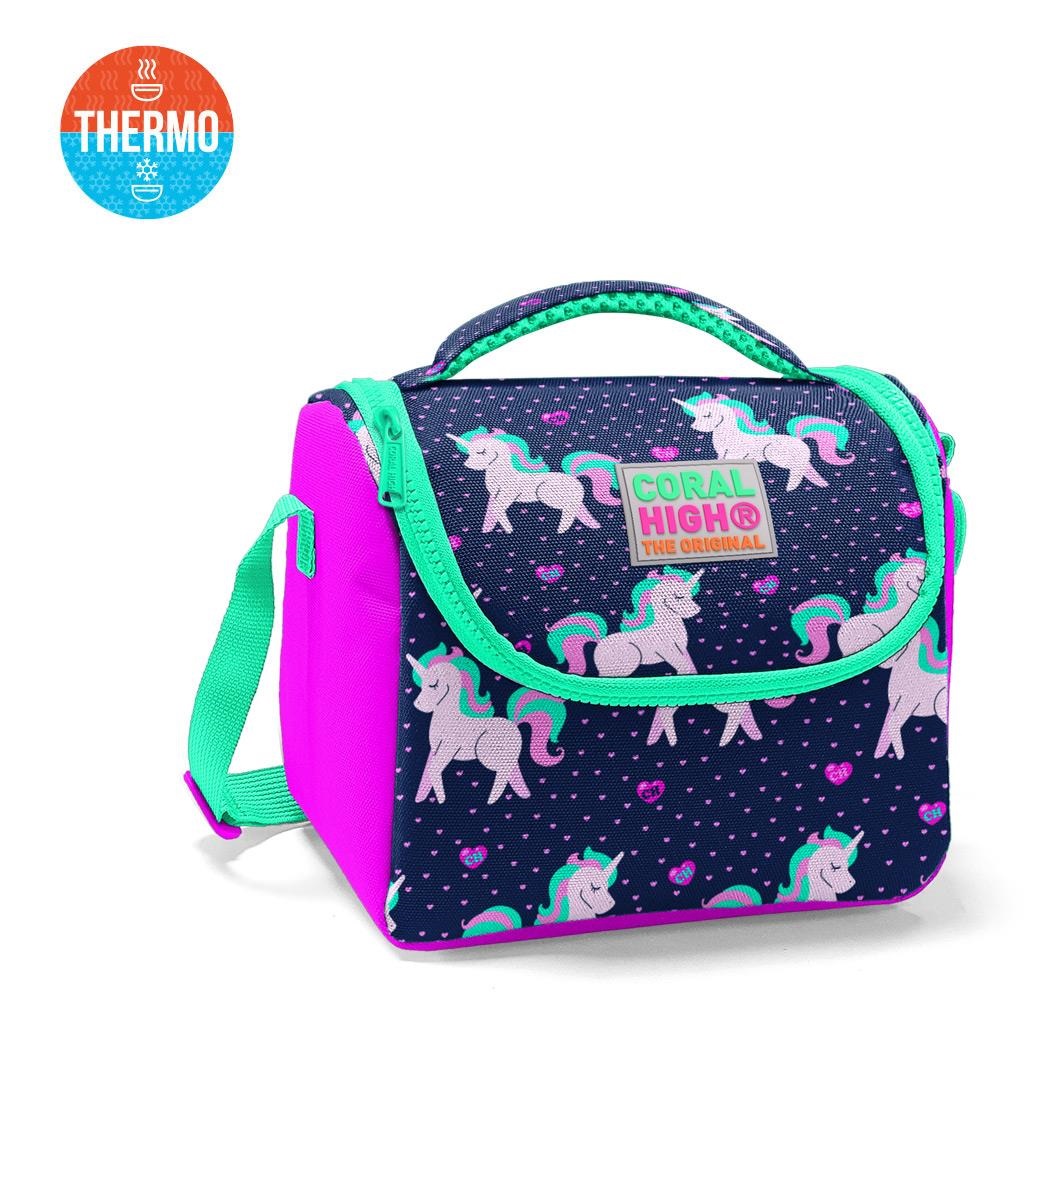 Coral High Kids Thermal Lunch Bag - Dark Blue Pink Unicorn Patterned